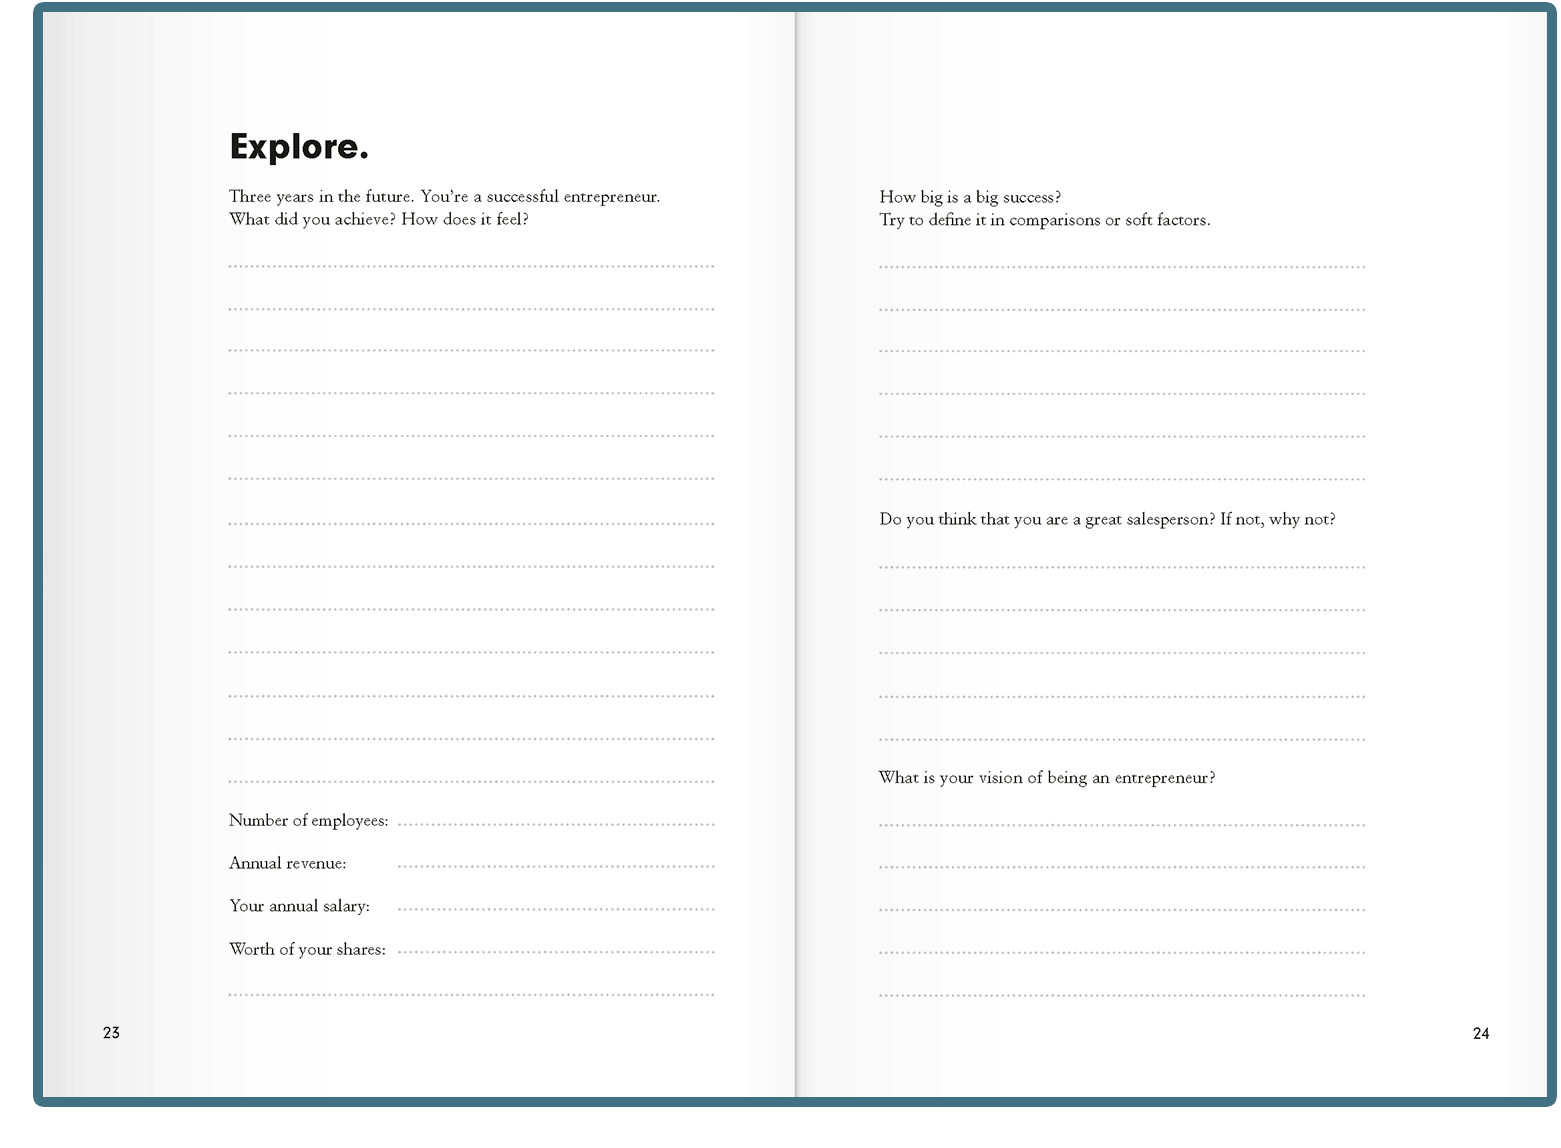 Start-up Journal: Think yourself into the future Example of an interactive double-page spread